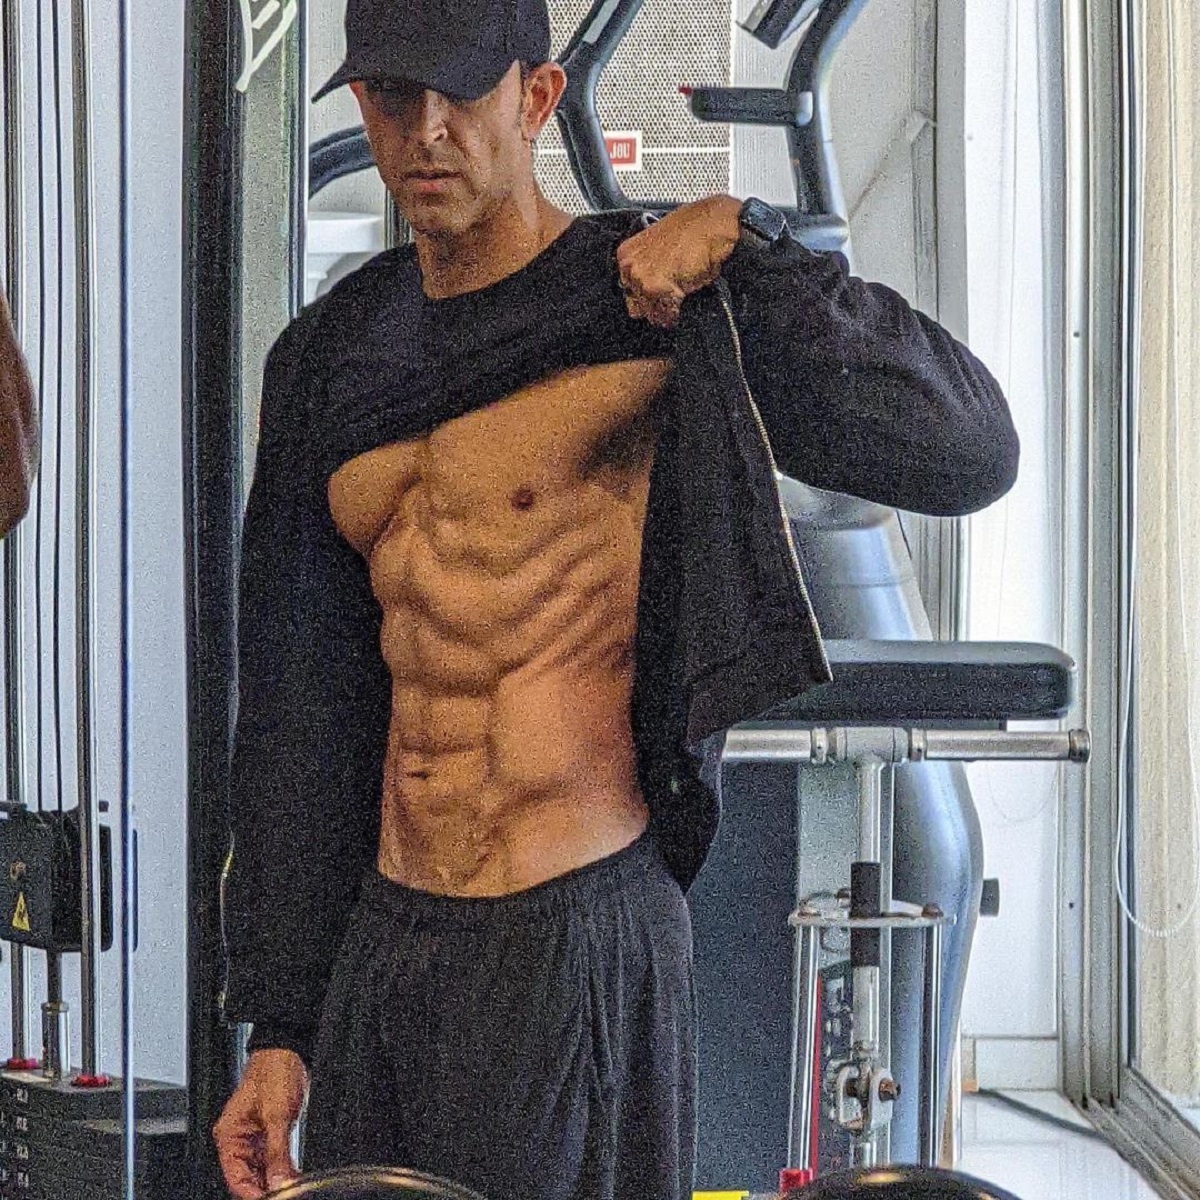 Hotness alert! Pictures of Hrithik flaunting ripped abs break the internet